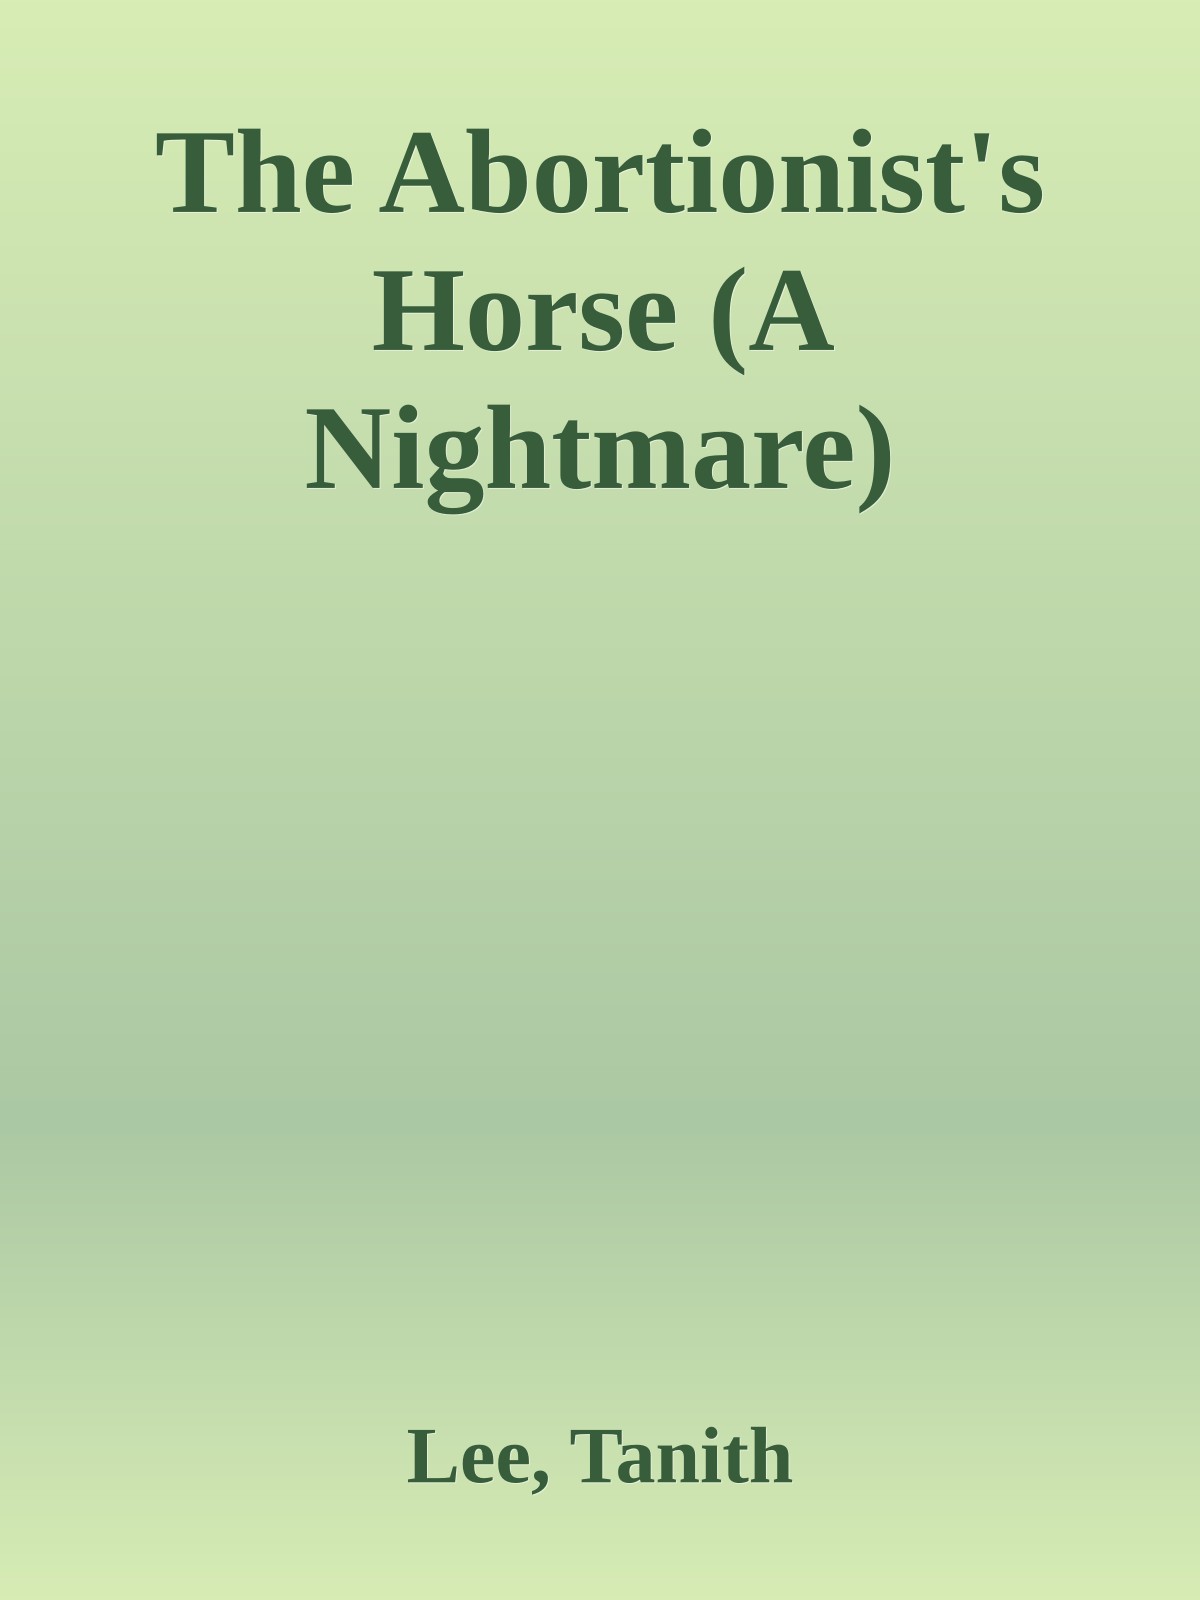 The Abortionist's Horse (A Nightmare)